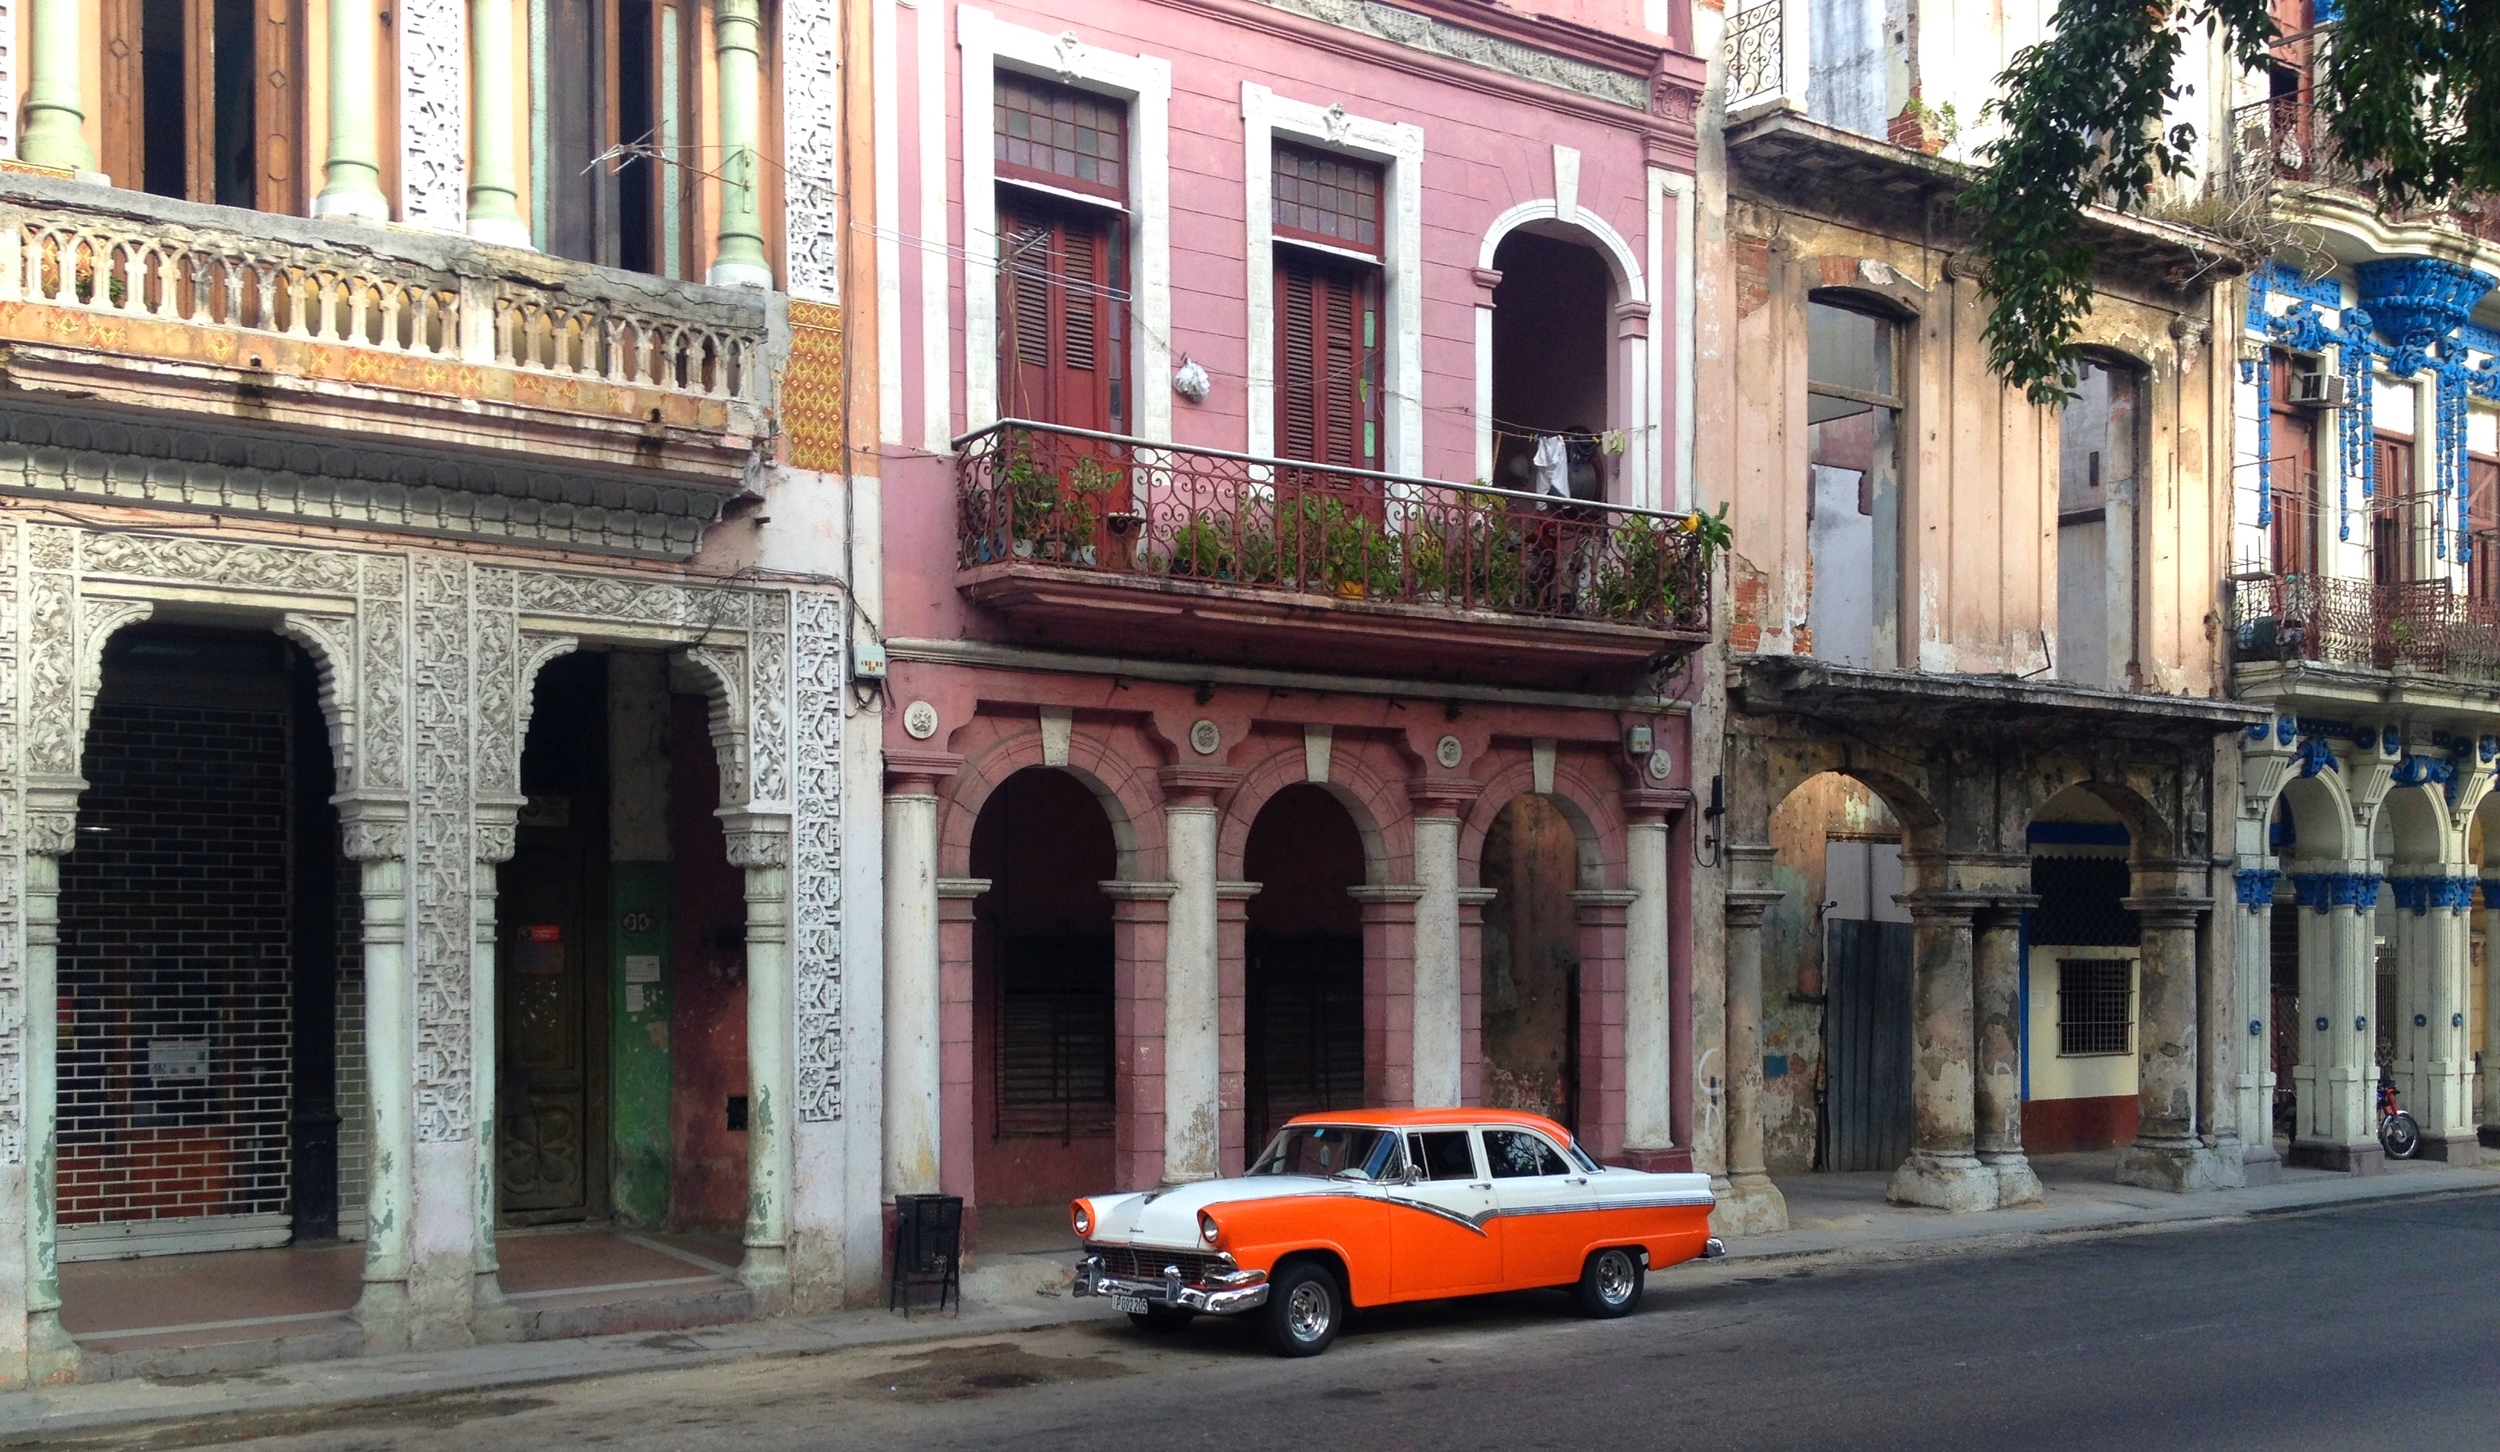  Street view from El Paseo del Prado in Old Havana. I took this photo during my July 2015 visit. 